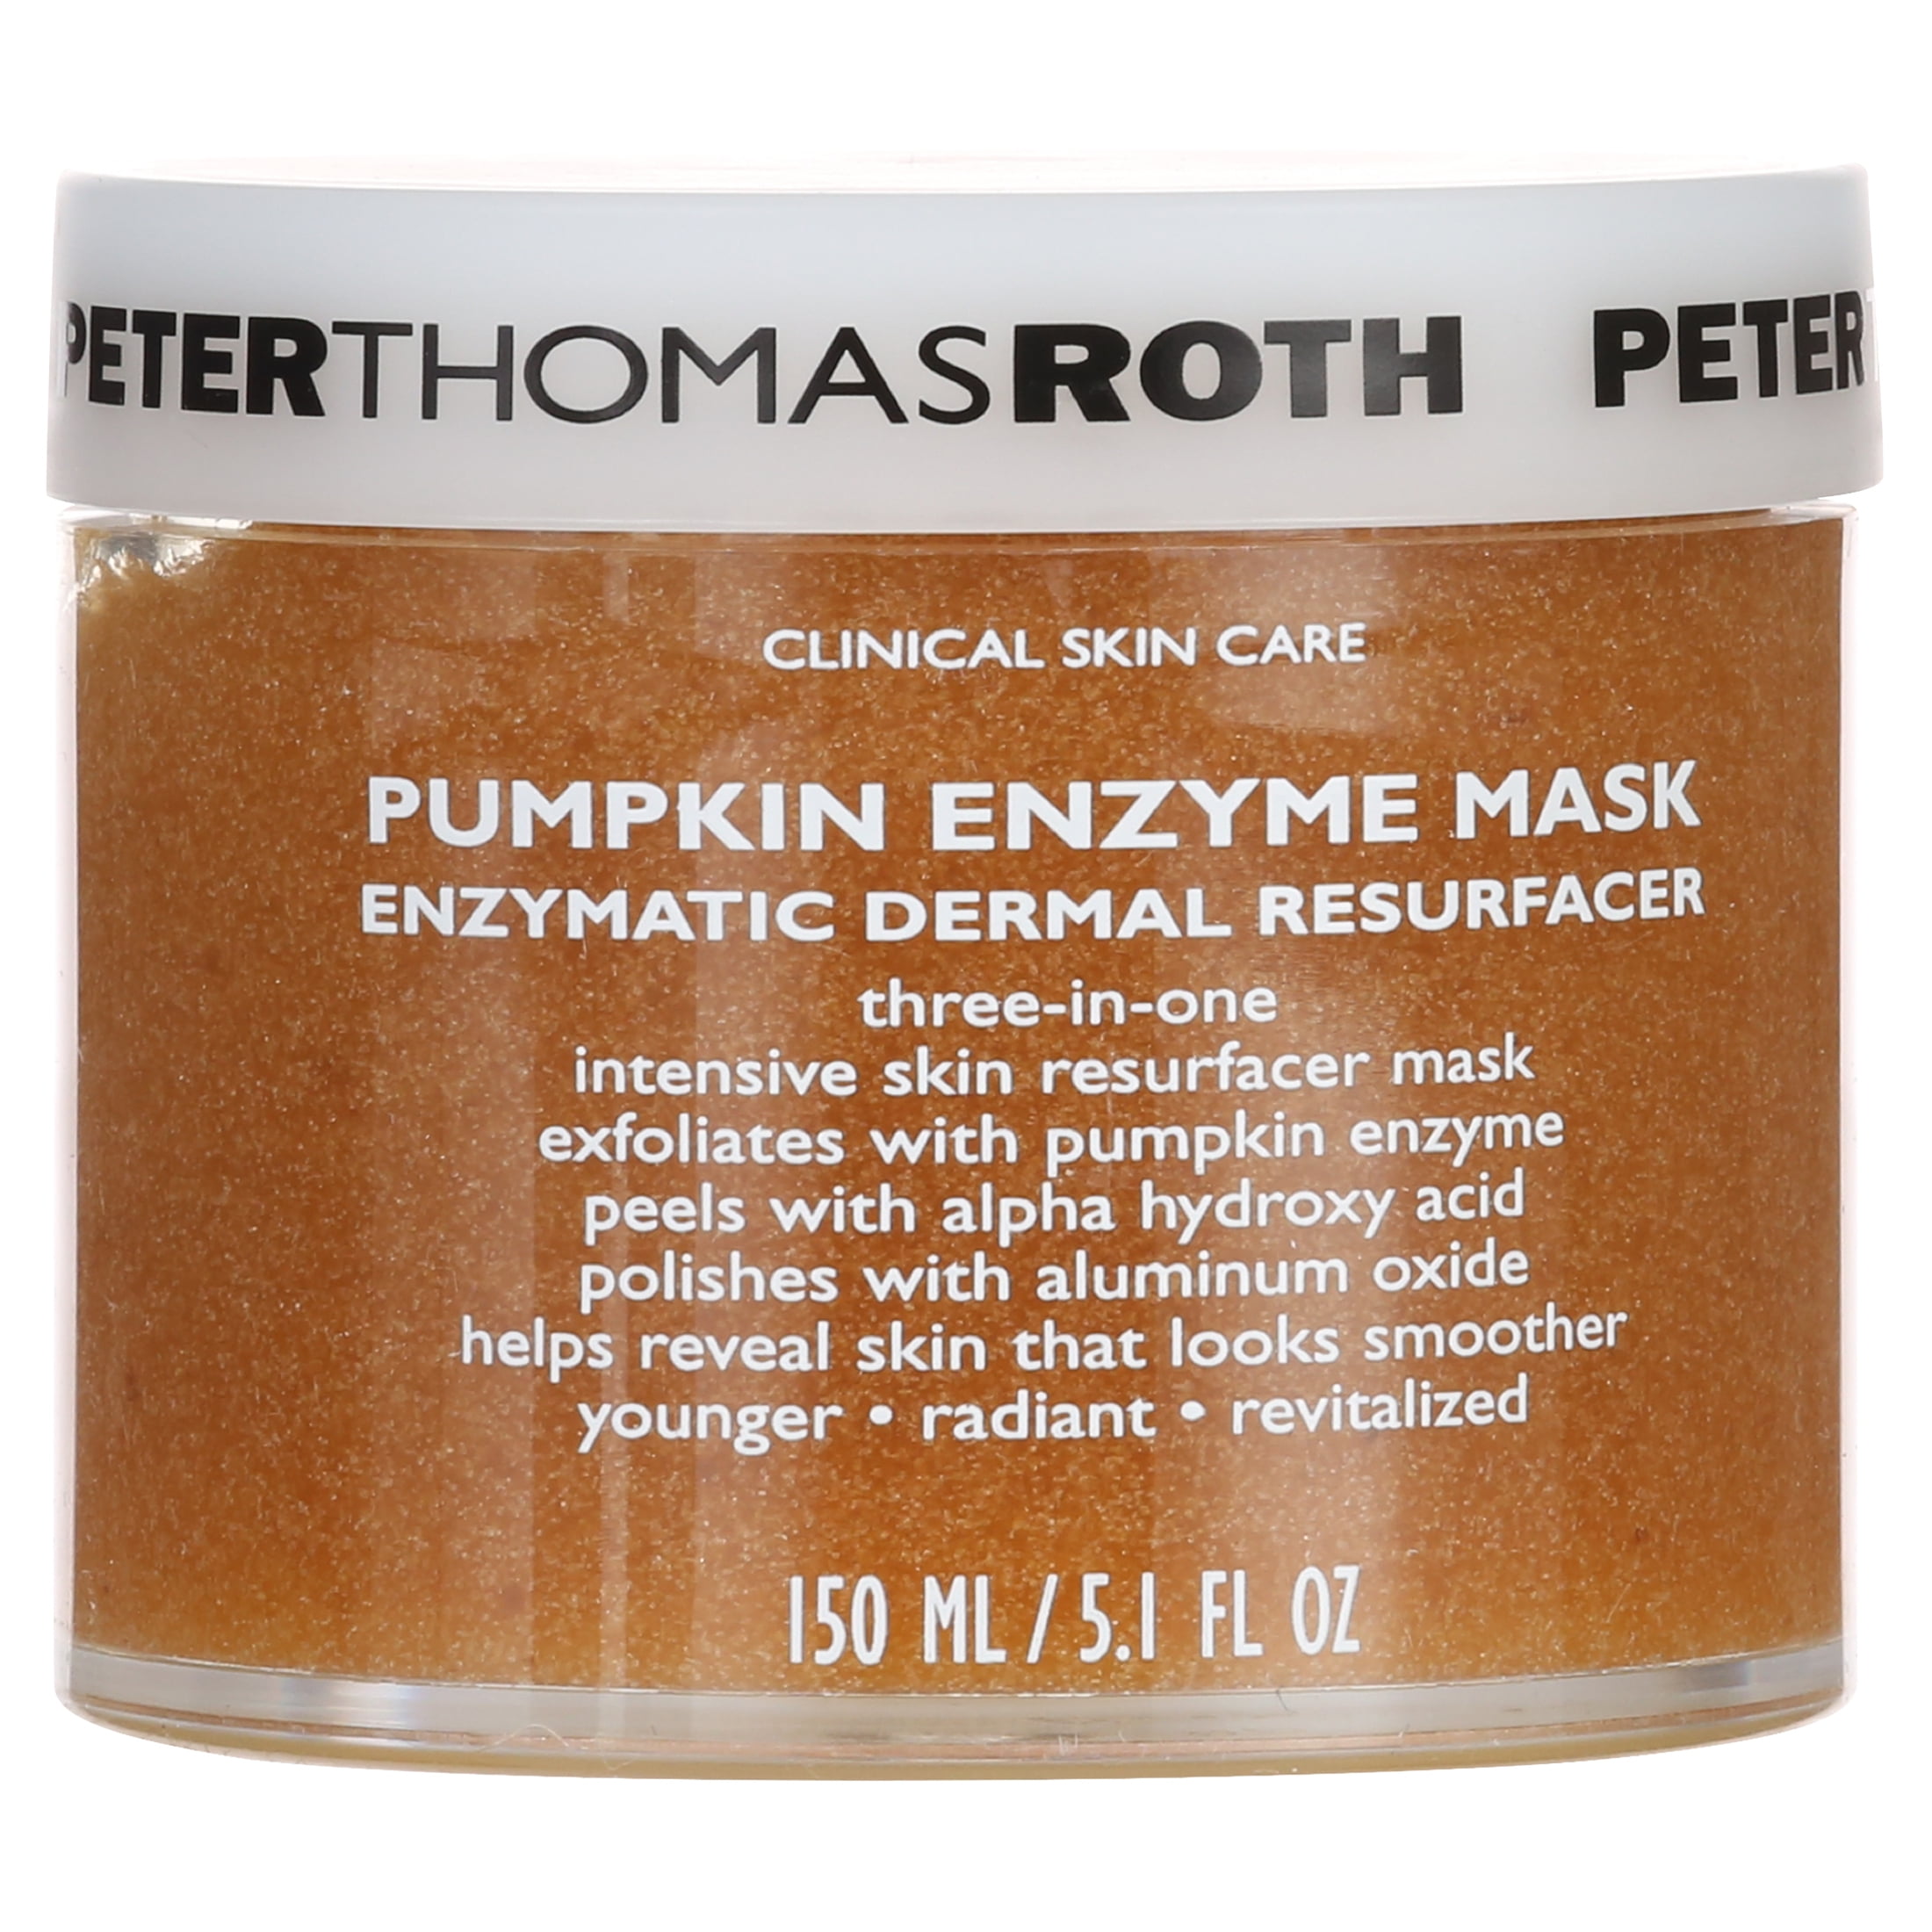 Peter Thomas Roth Pumpkin Enzyme Face Mask, 5 oz image